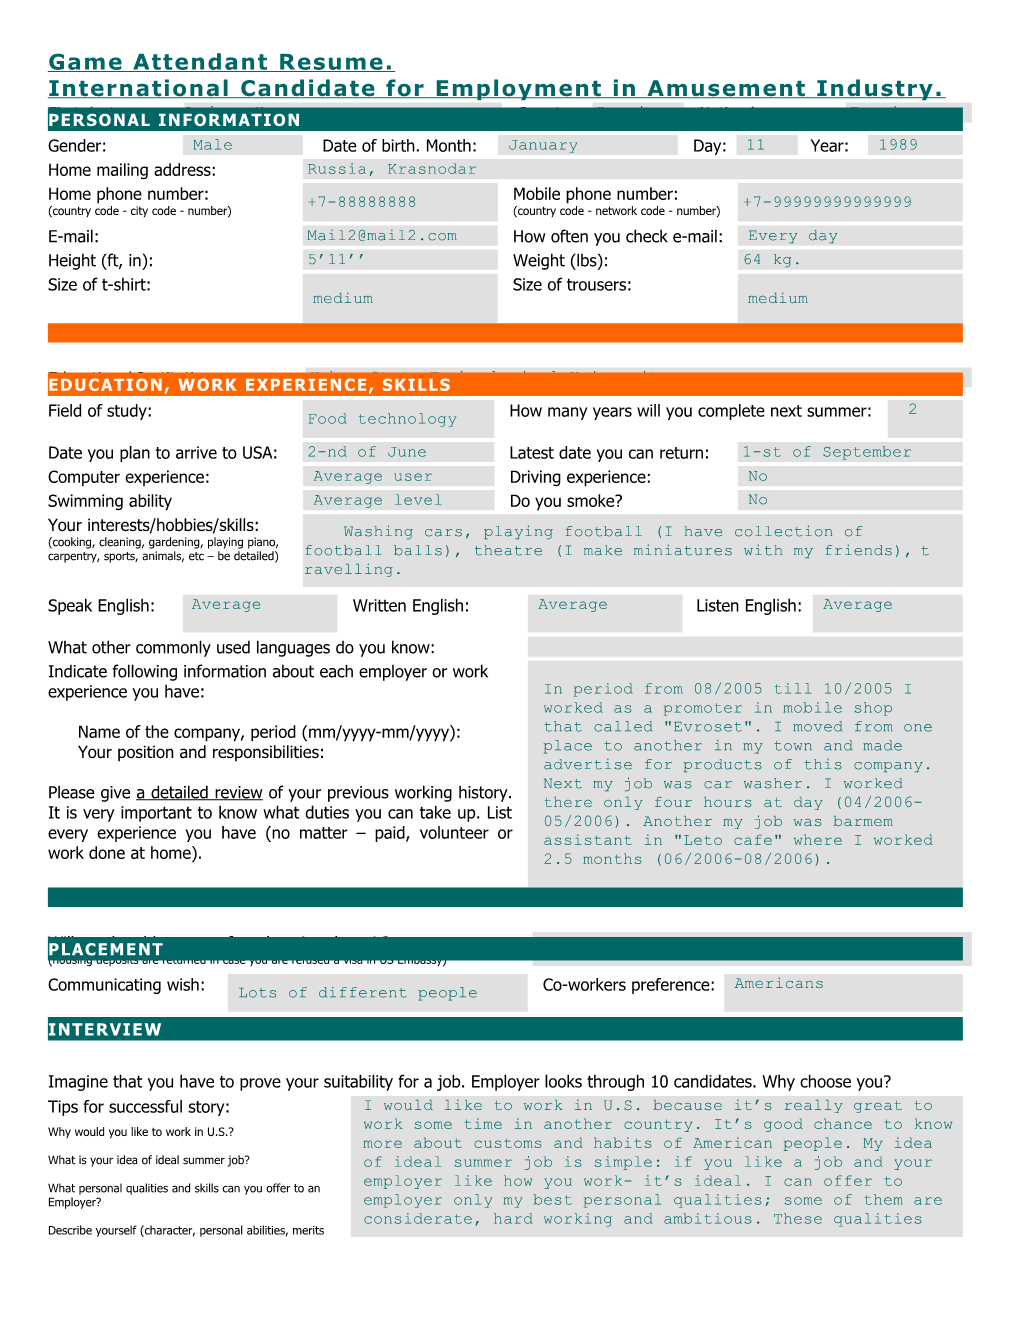 Resume of an International Worker from Russia for Placement As a Game Attendant